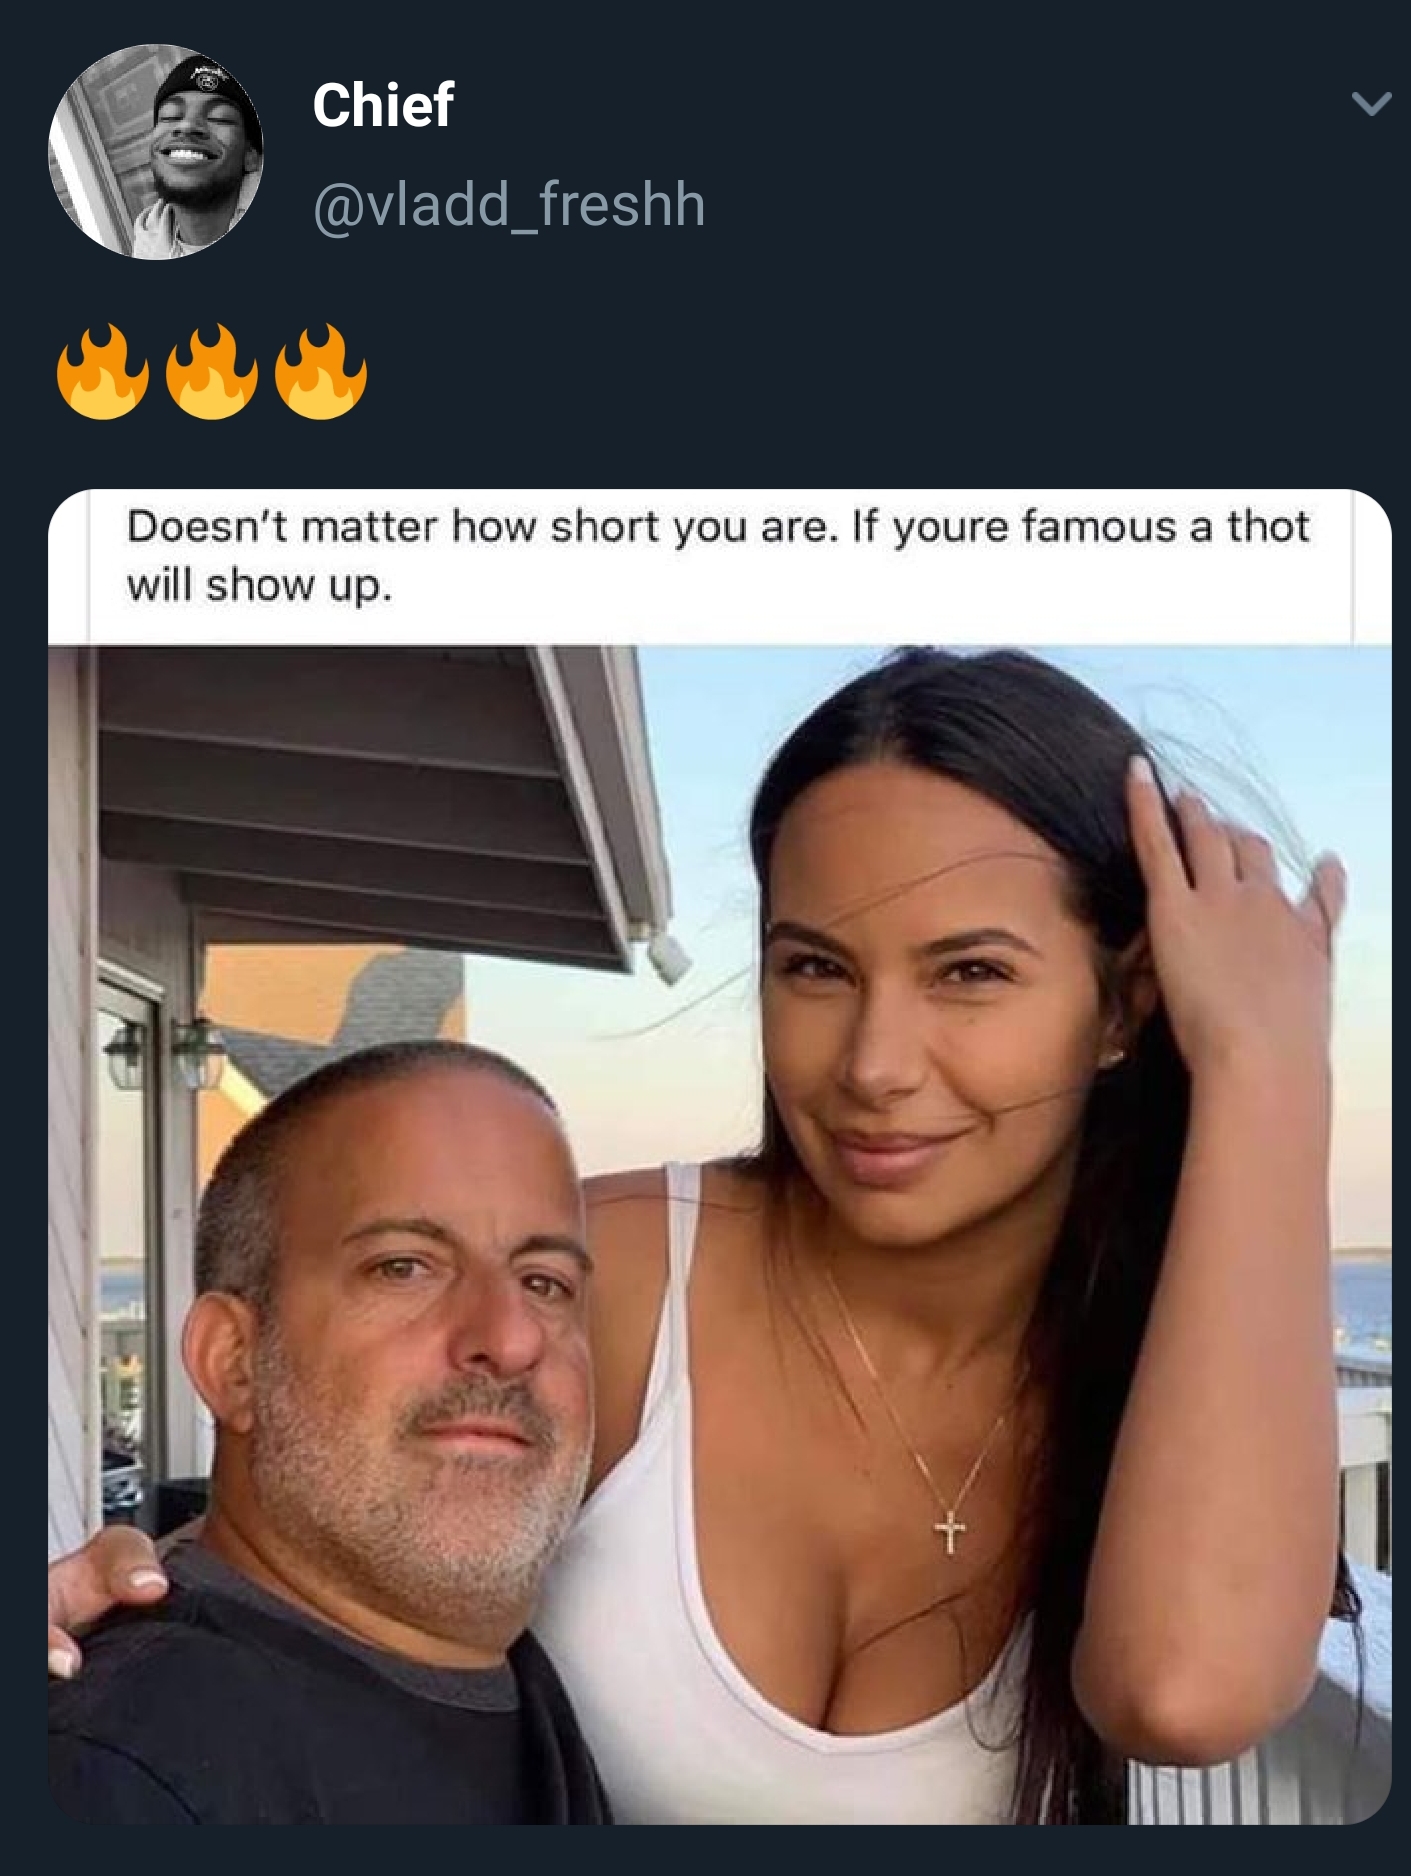 Chief Doesn't matter how short you are. If youre famous a thot will show up.